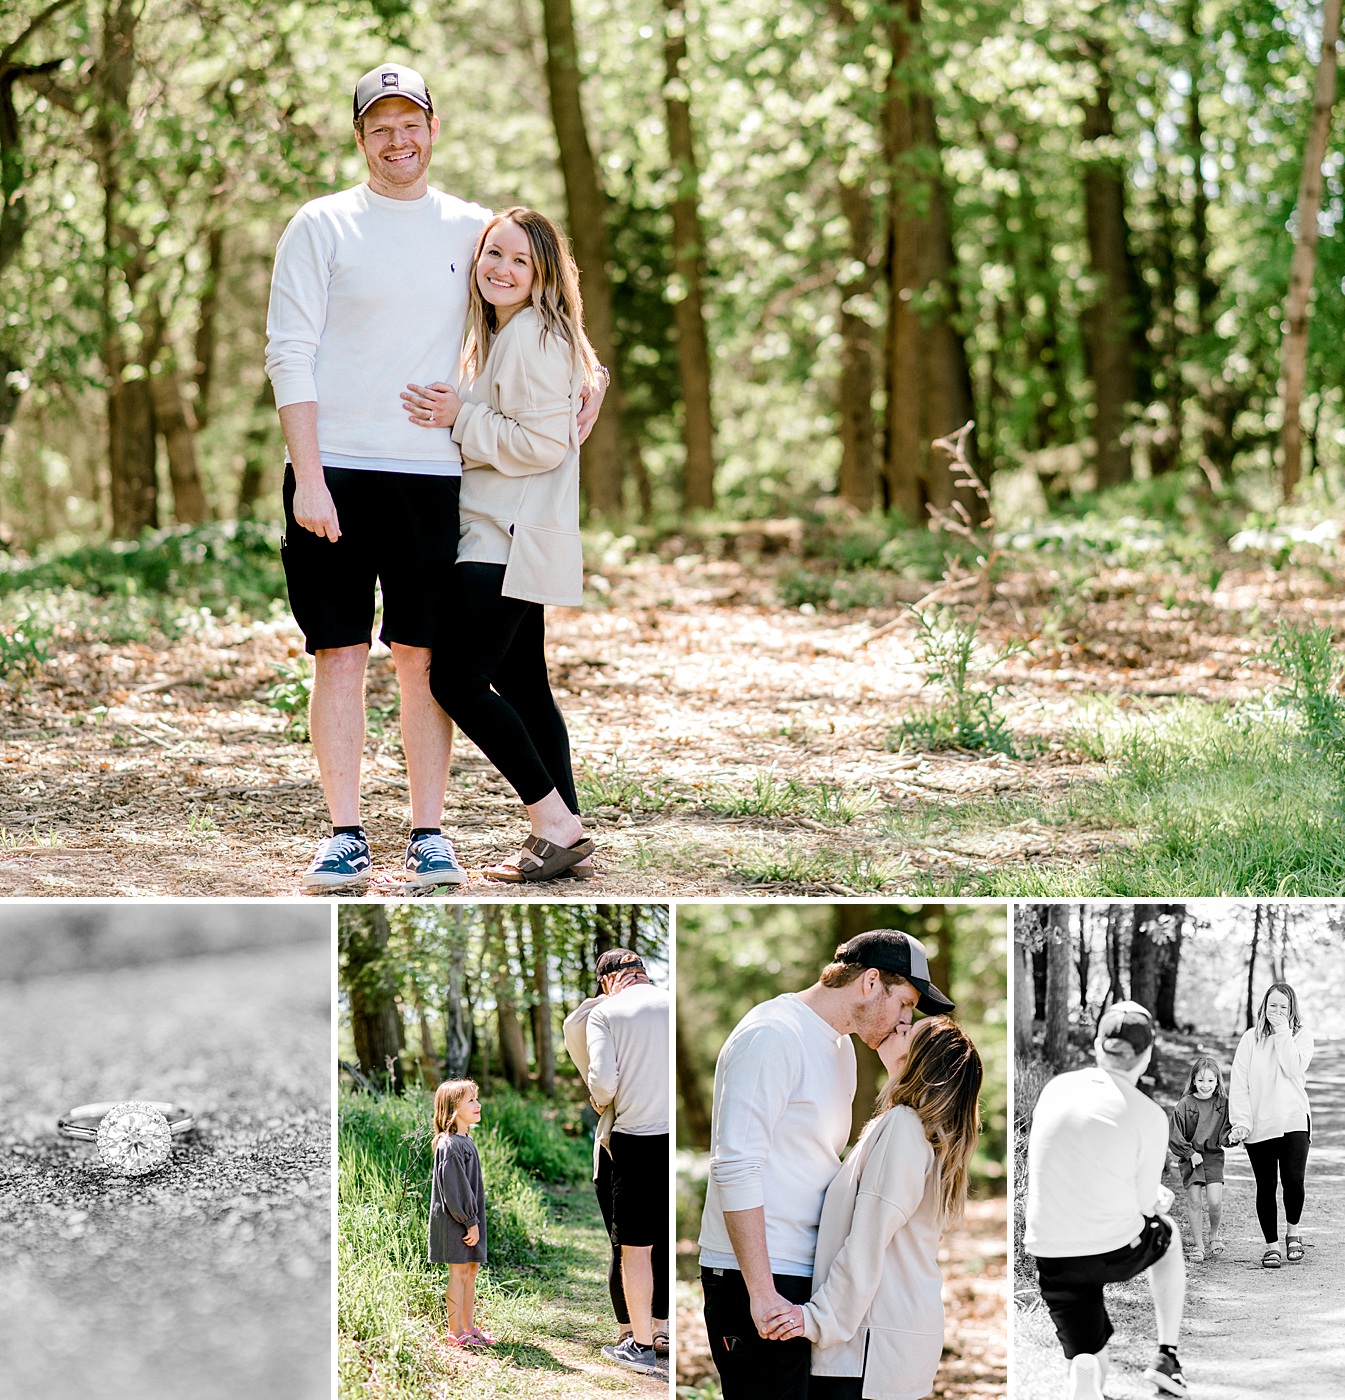 Howell Mi photography. A beautiful park setting engagement photo session of a family after a surprise proposal.